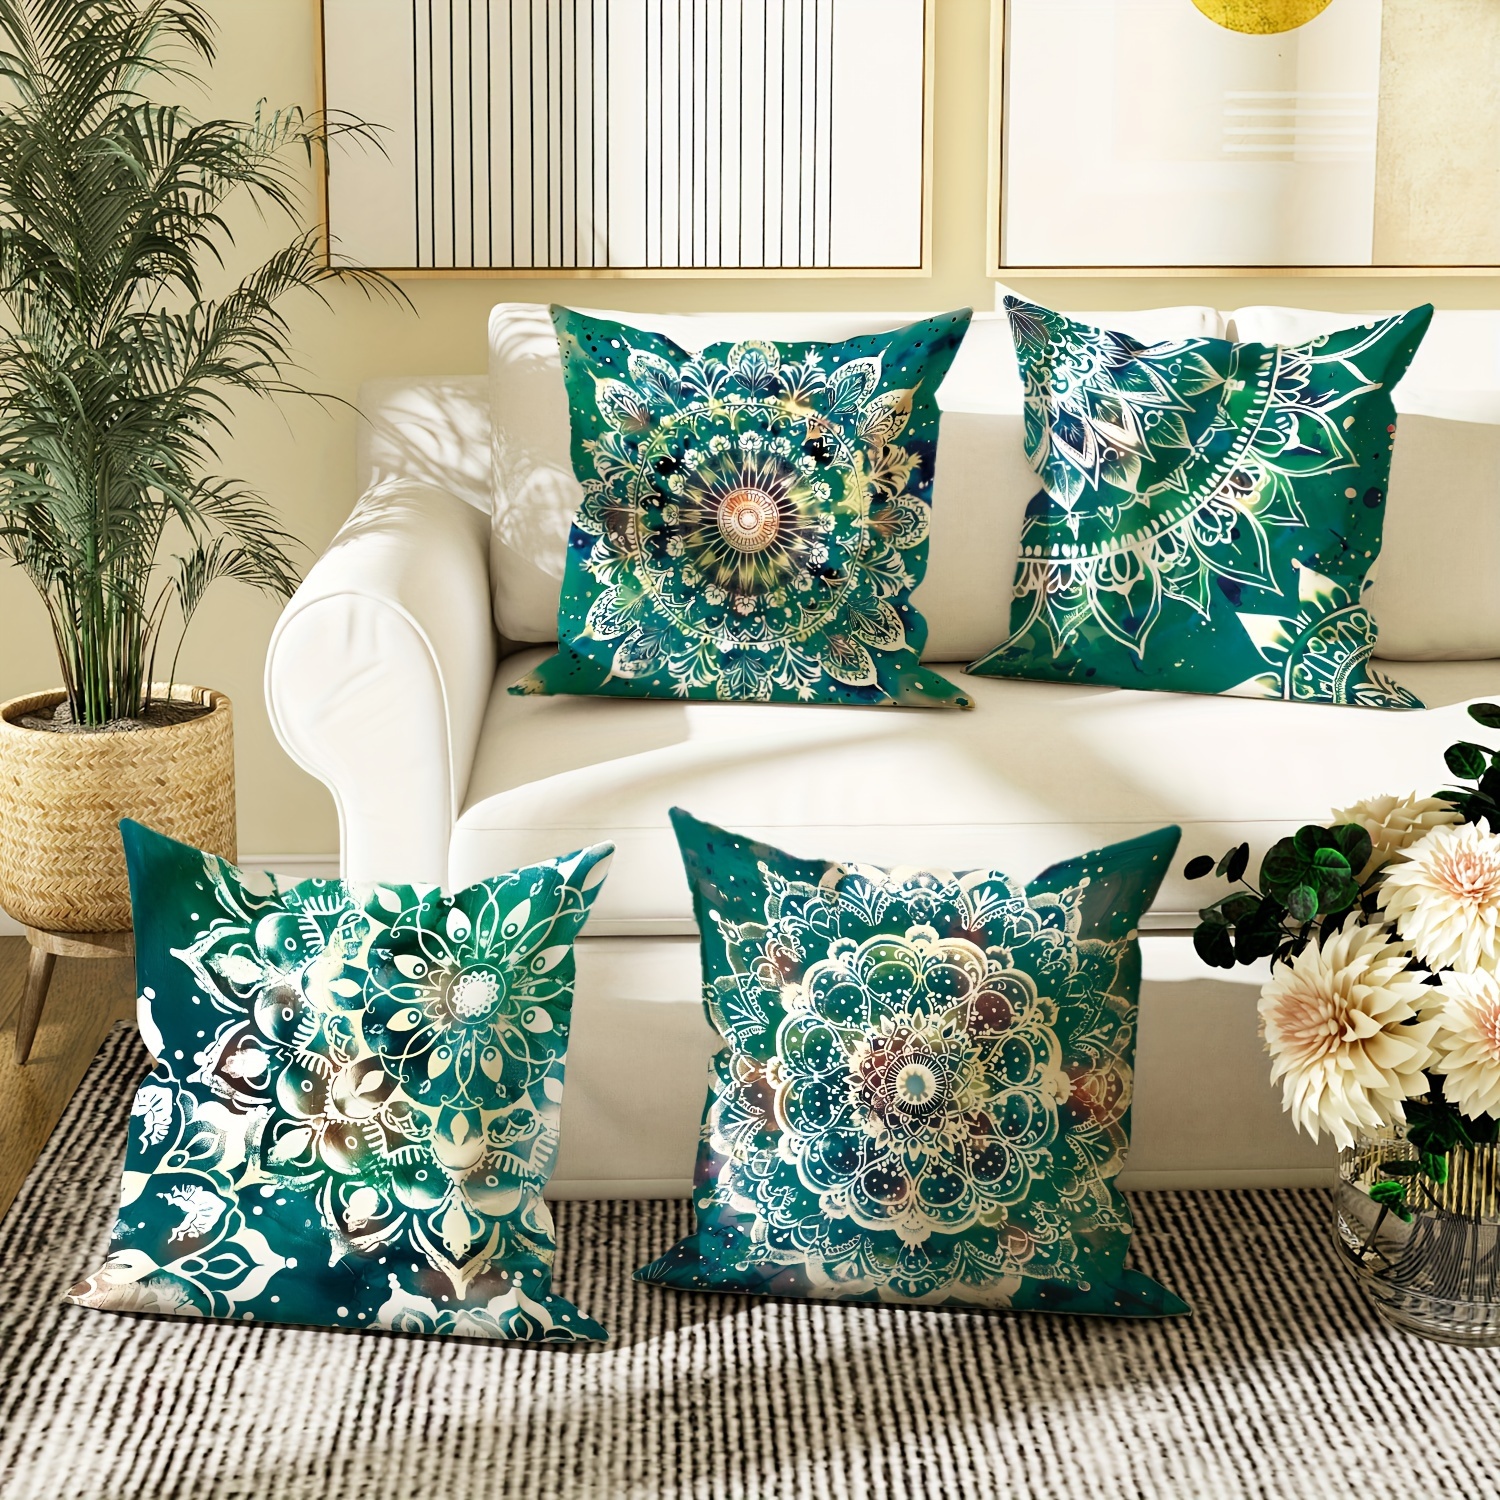 

4-piece Set Velvet Mandala & Floral Throw Pillow Covers - Boho Chic 18x18 Inch Cushion Cases With Zipper Closure For Living Room, Bedroom, And Sofa Decor - Machine Washable, Polyester